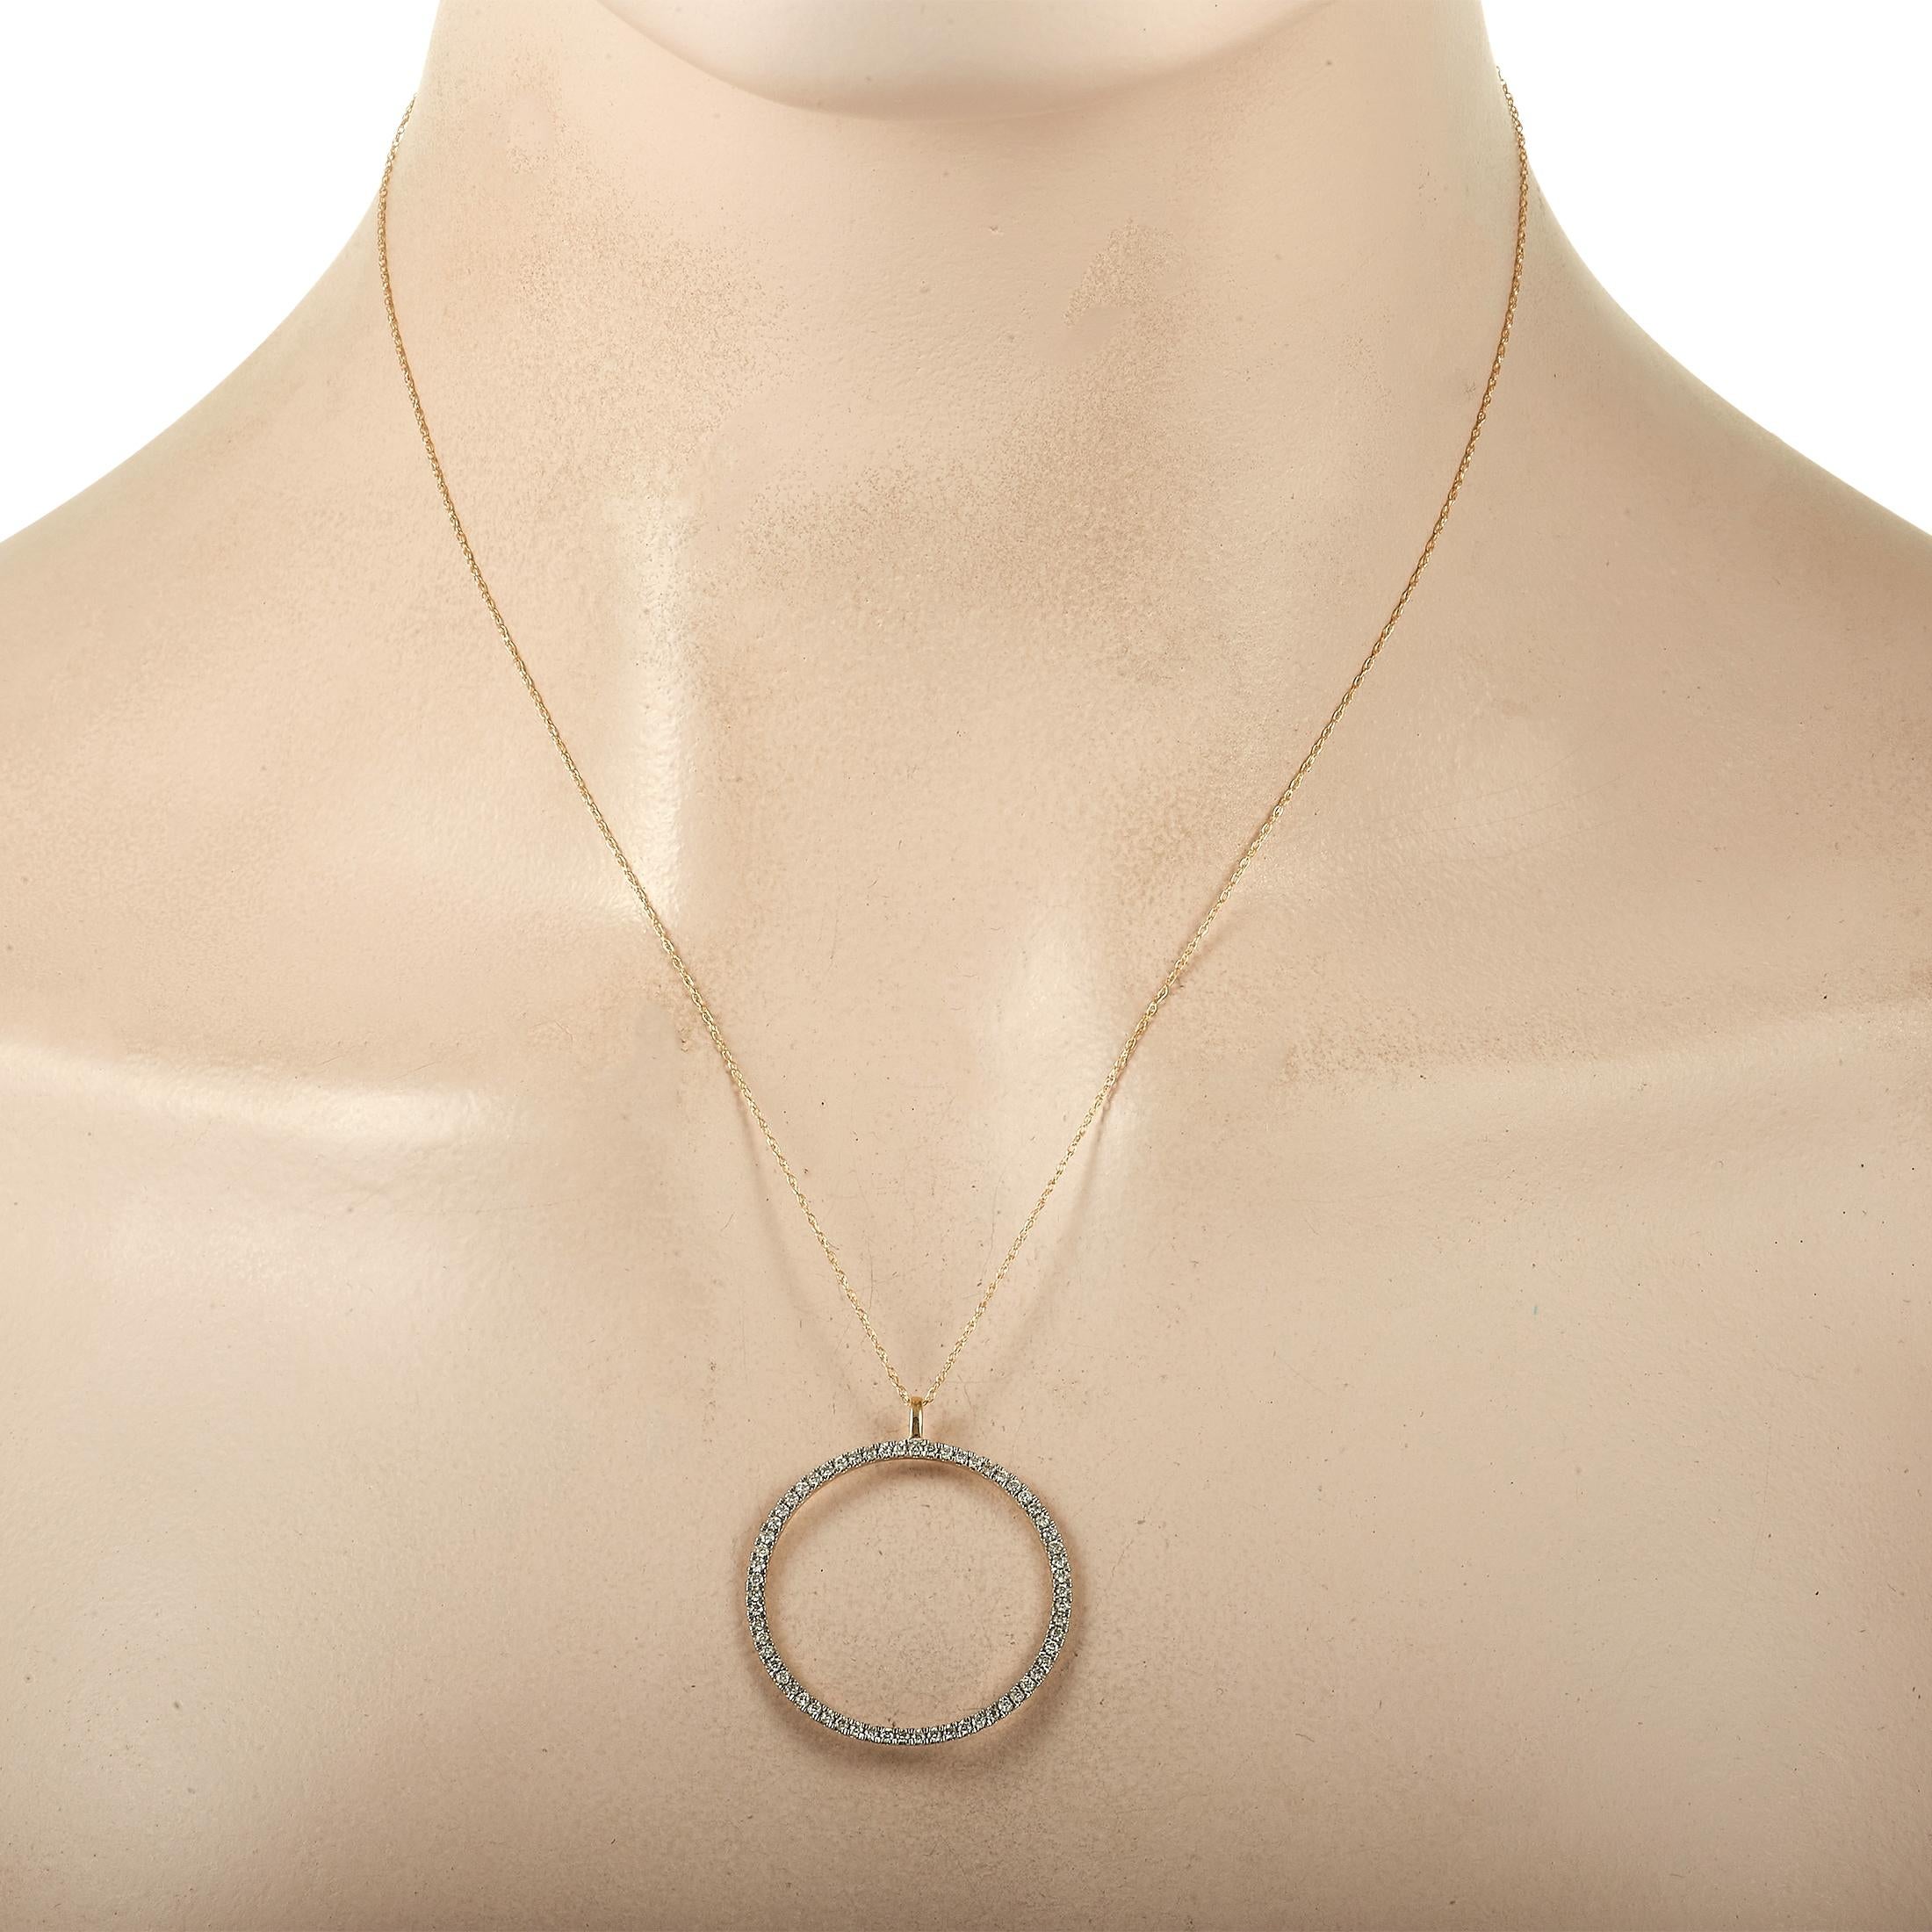 This simple LB Exclusive 14K Yellow Gold 0.50 ct Diamond Necklace is a minimalist's dream. The necklace is made with a yellow gold chain, highlighting a gorgeous 14K yellow gold circle pendant. The pendant is set with a total of 0.50 carats of